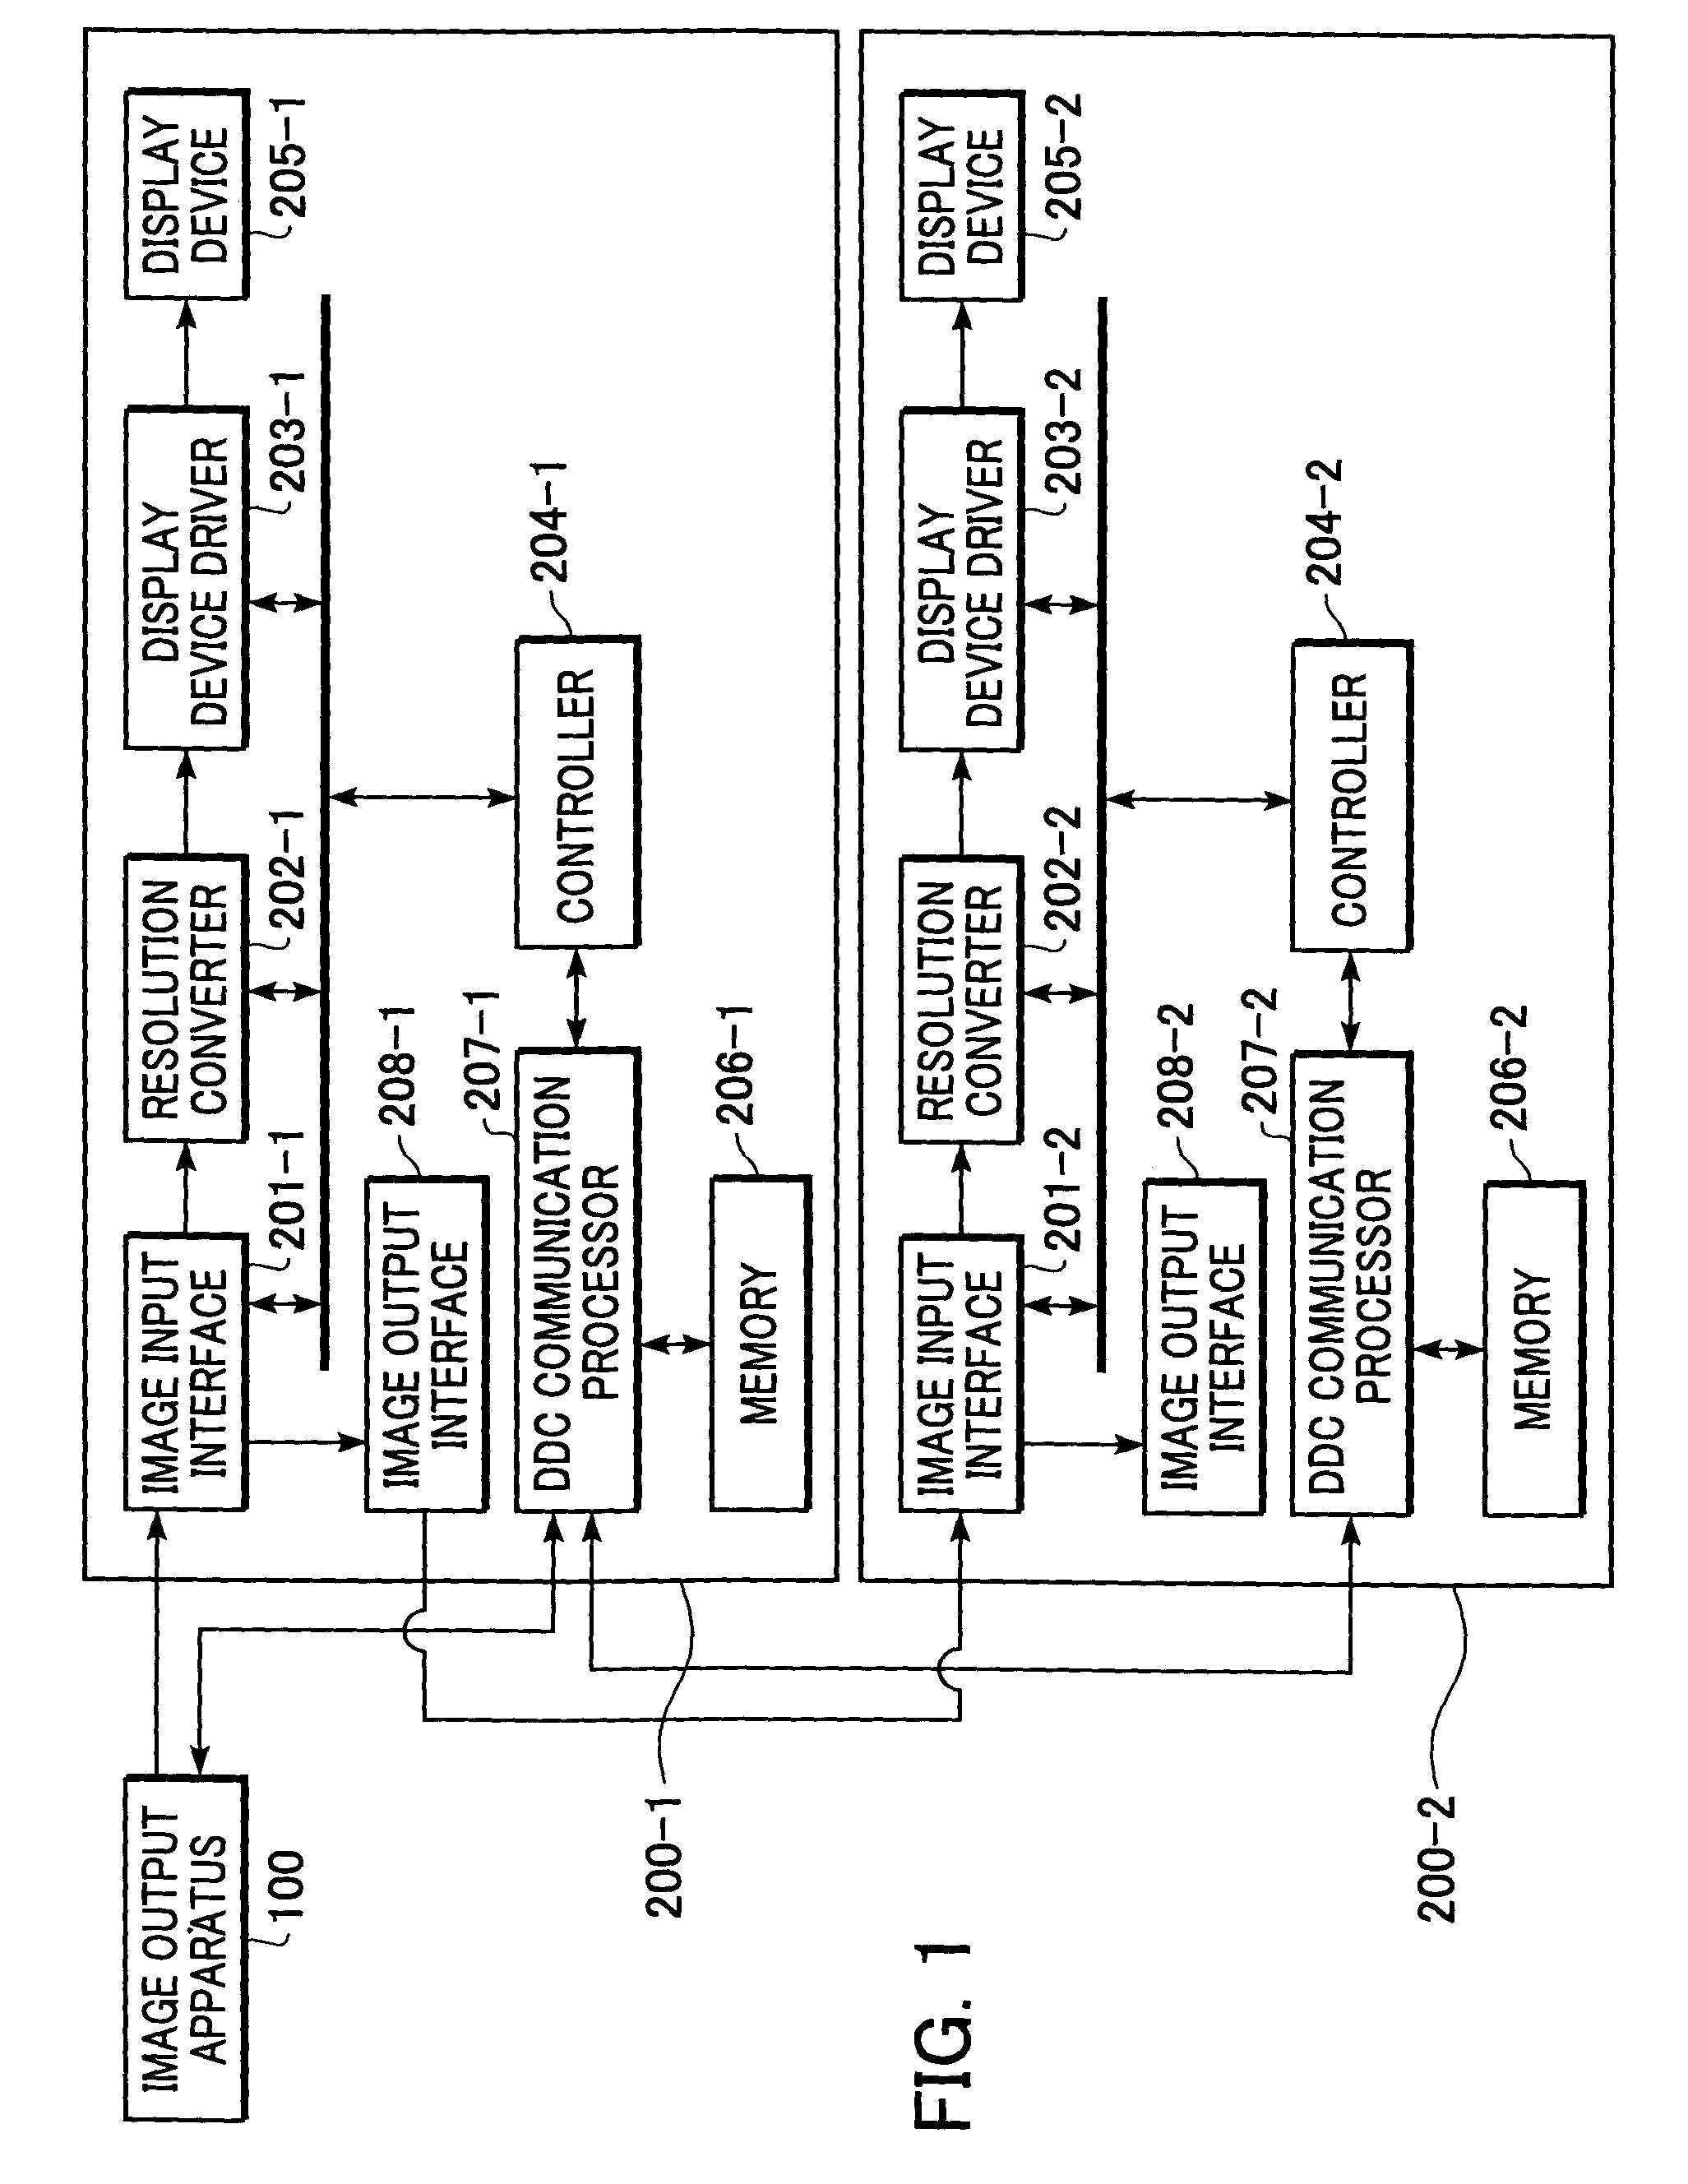 Display apparatus, method of controlling the same, and multidisplay system